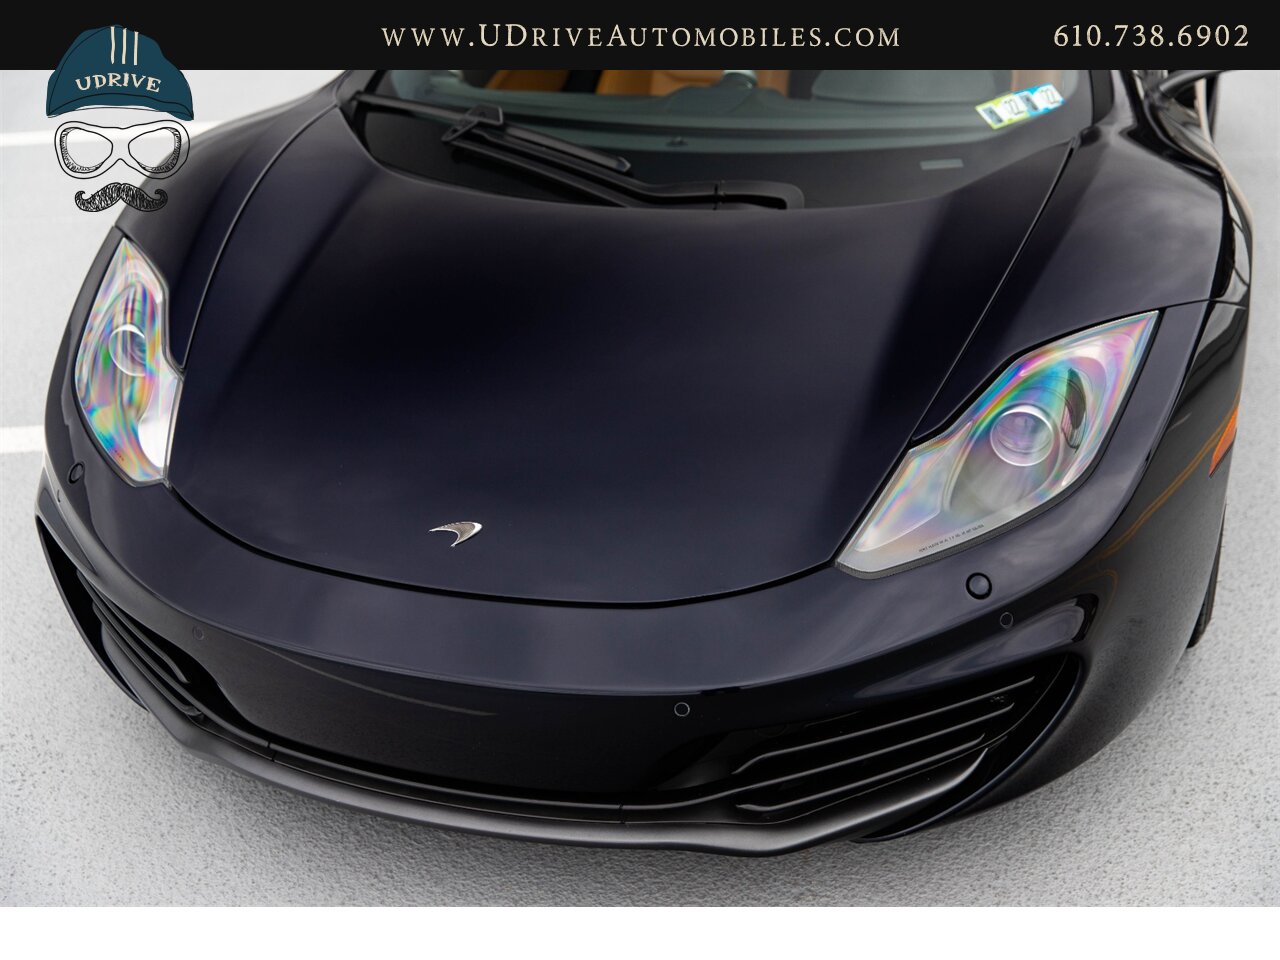 2013 McLaren MP4-12C Spider 1 Owner 6k Miles Carbon Fiber Full Leather  Sapphire Black over Natural Tan Leather - Photo 9 - West Chester, PA 19382